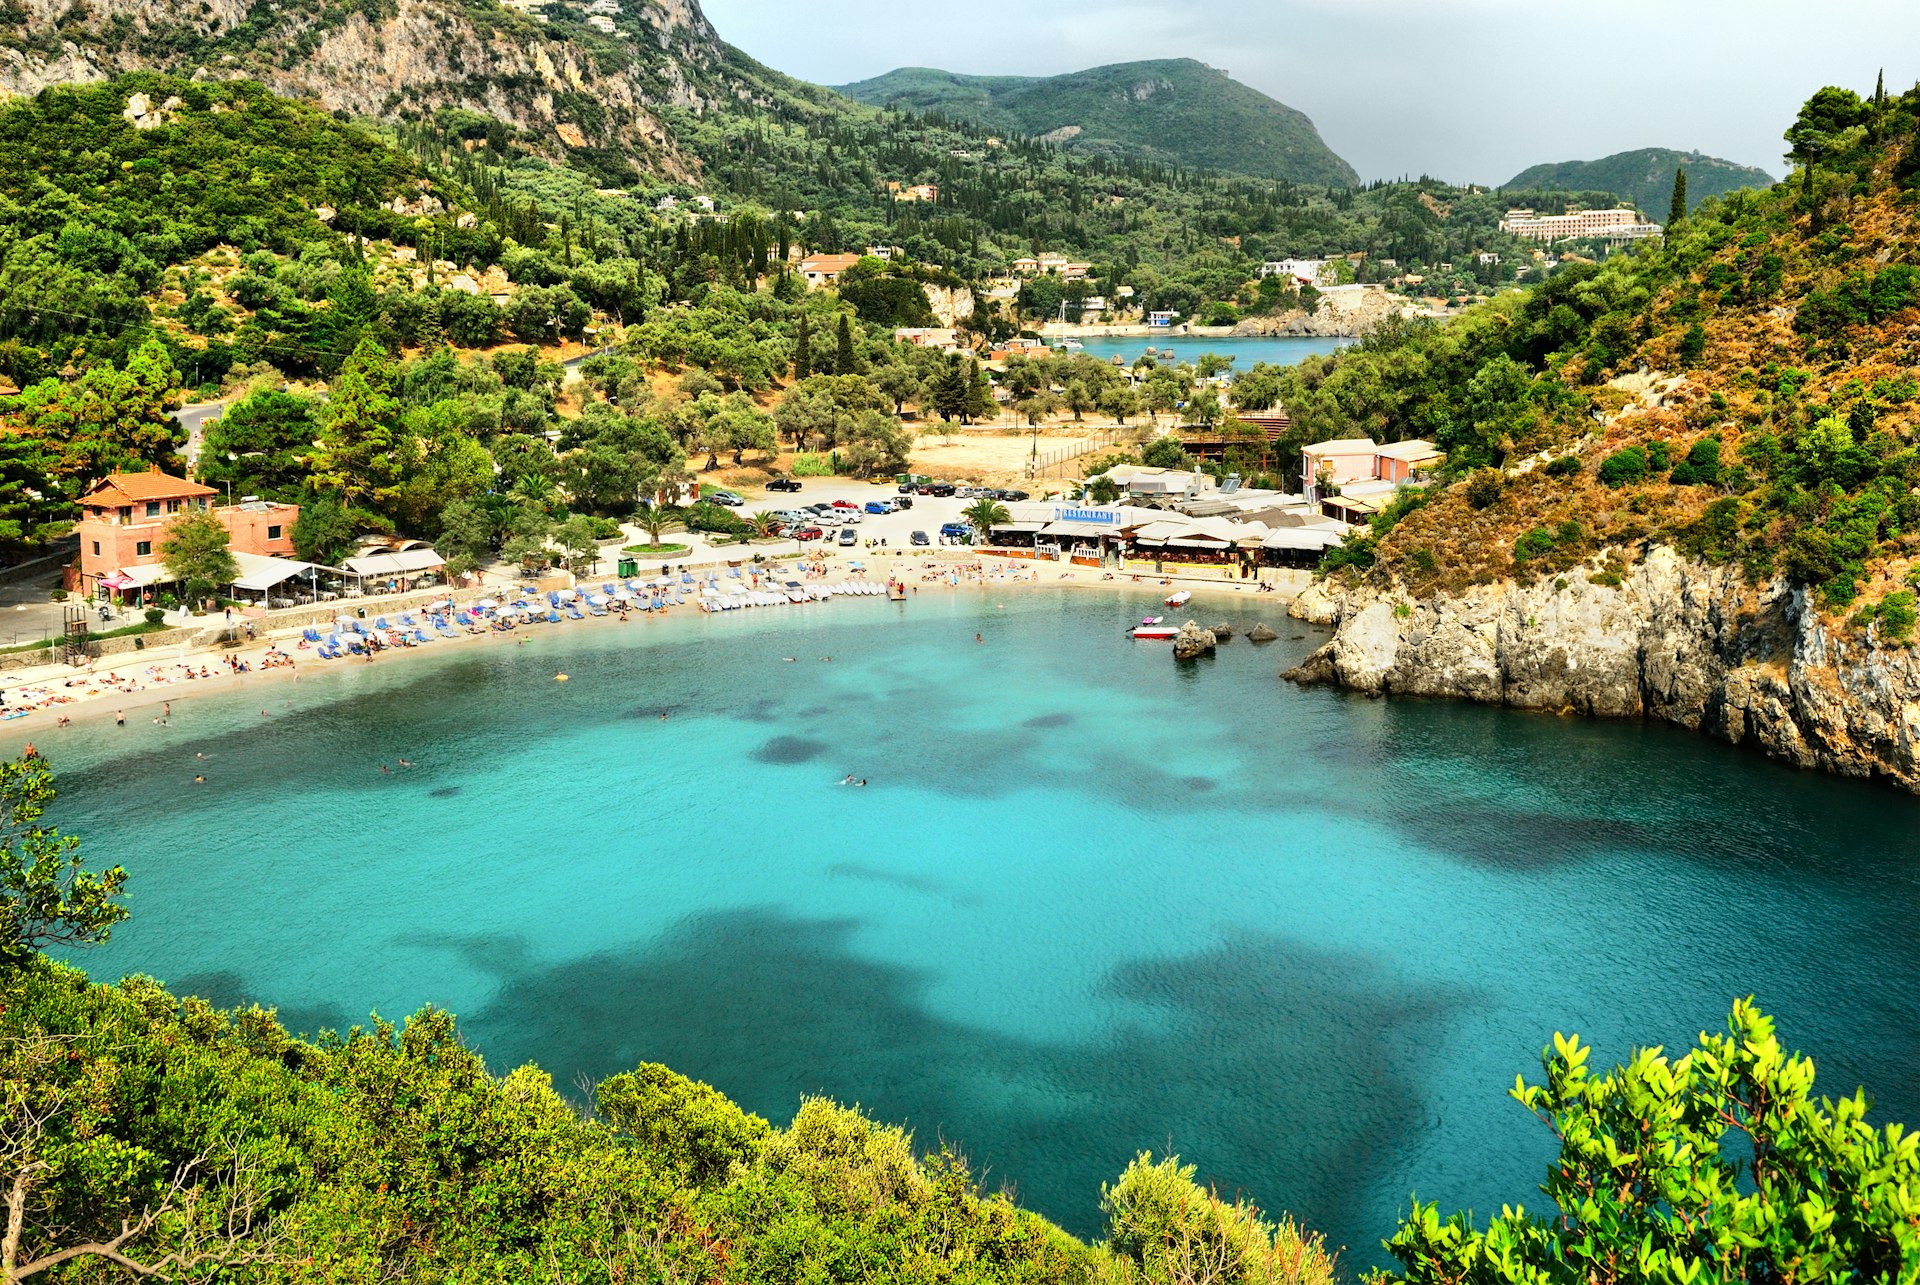 A view of Paleokastritsa Bay, Corfu. The water is an inviting turquoise blue, while a number of tourists lounge on a curving strip of white sand. Beyond them are green hills.